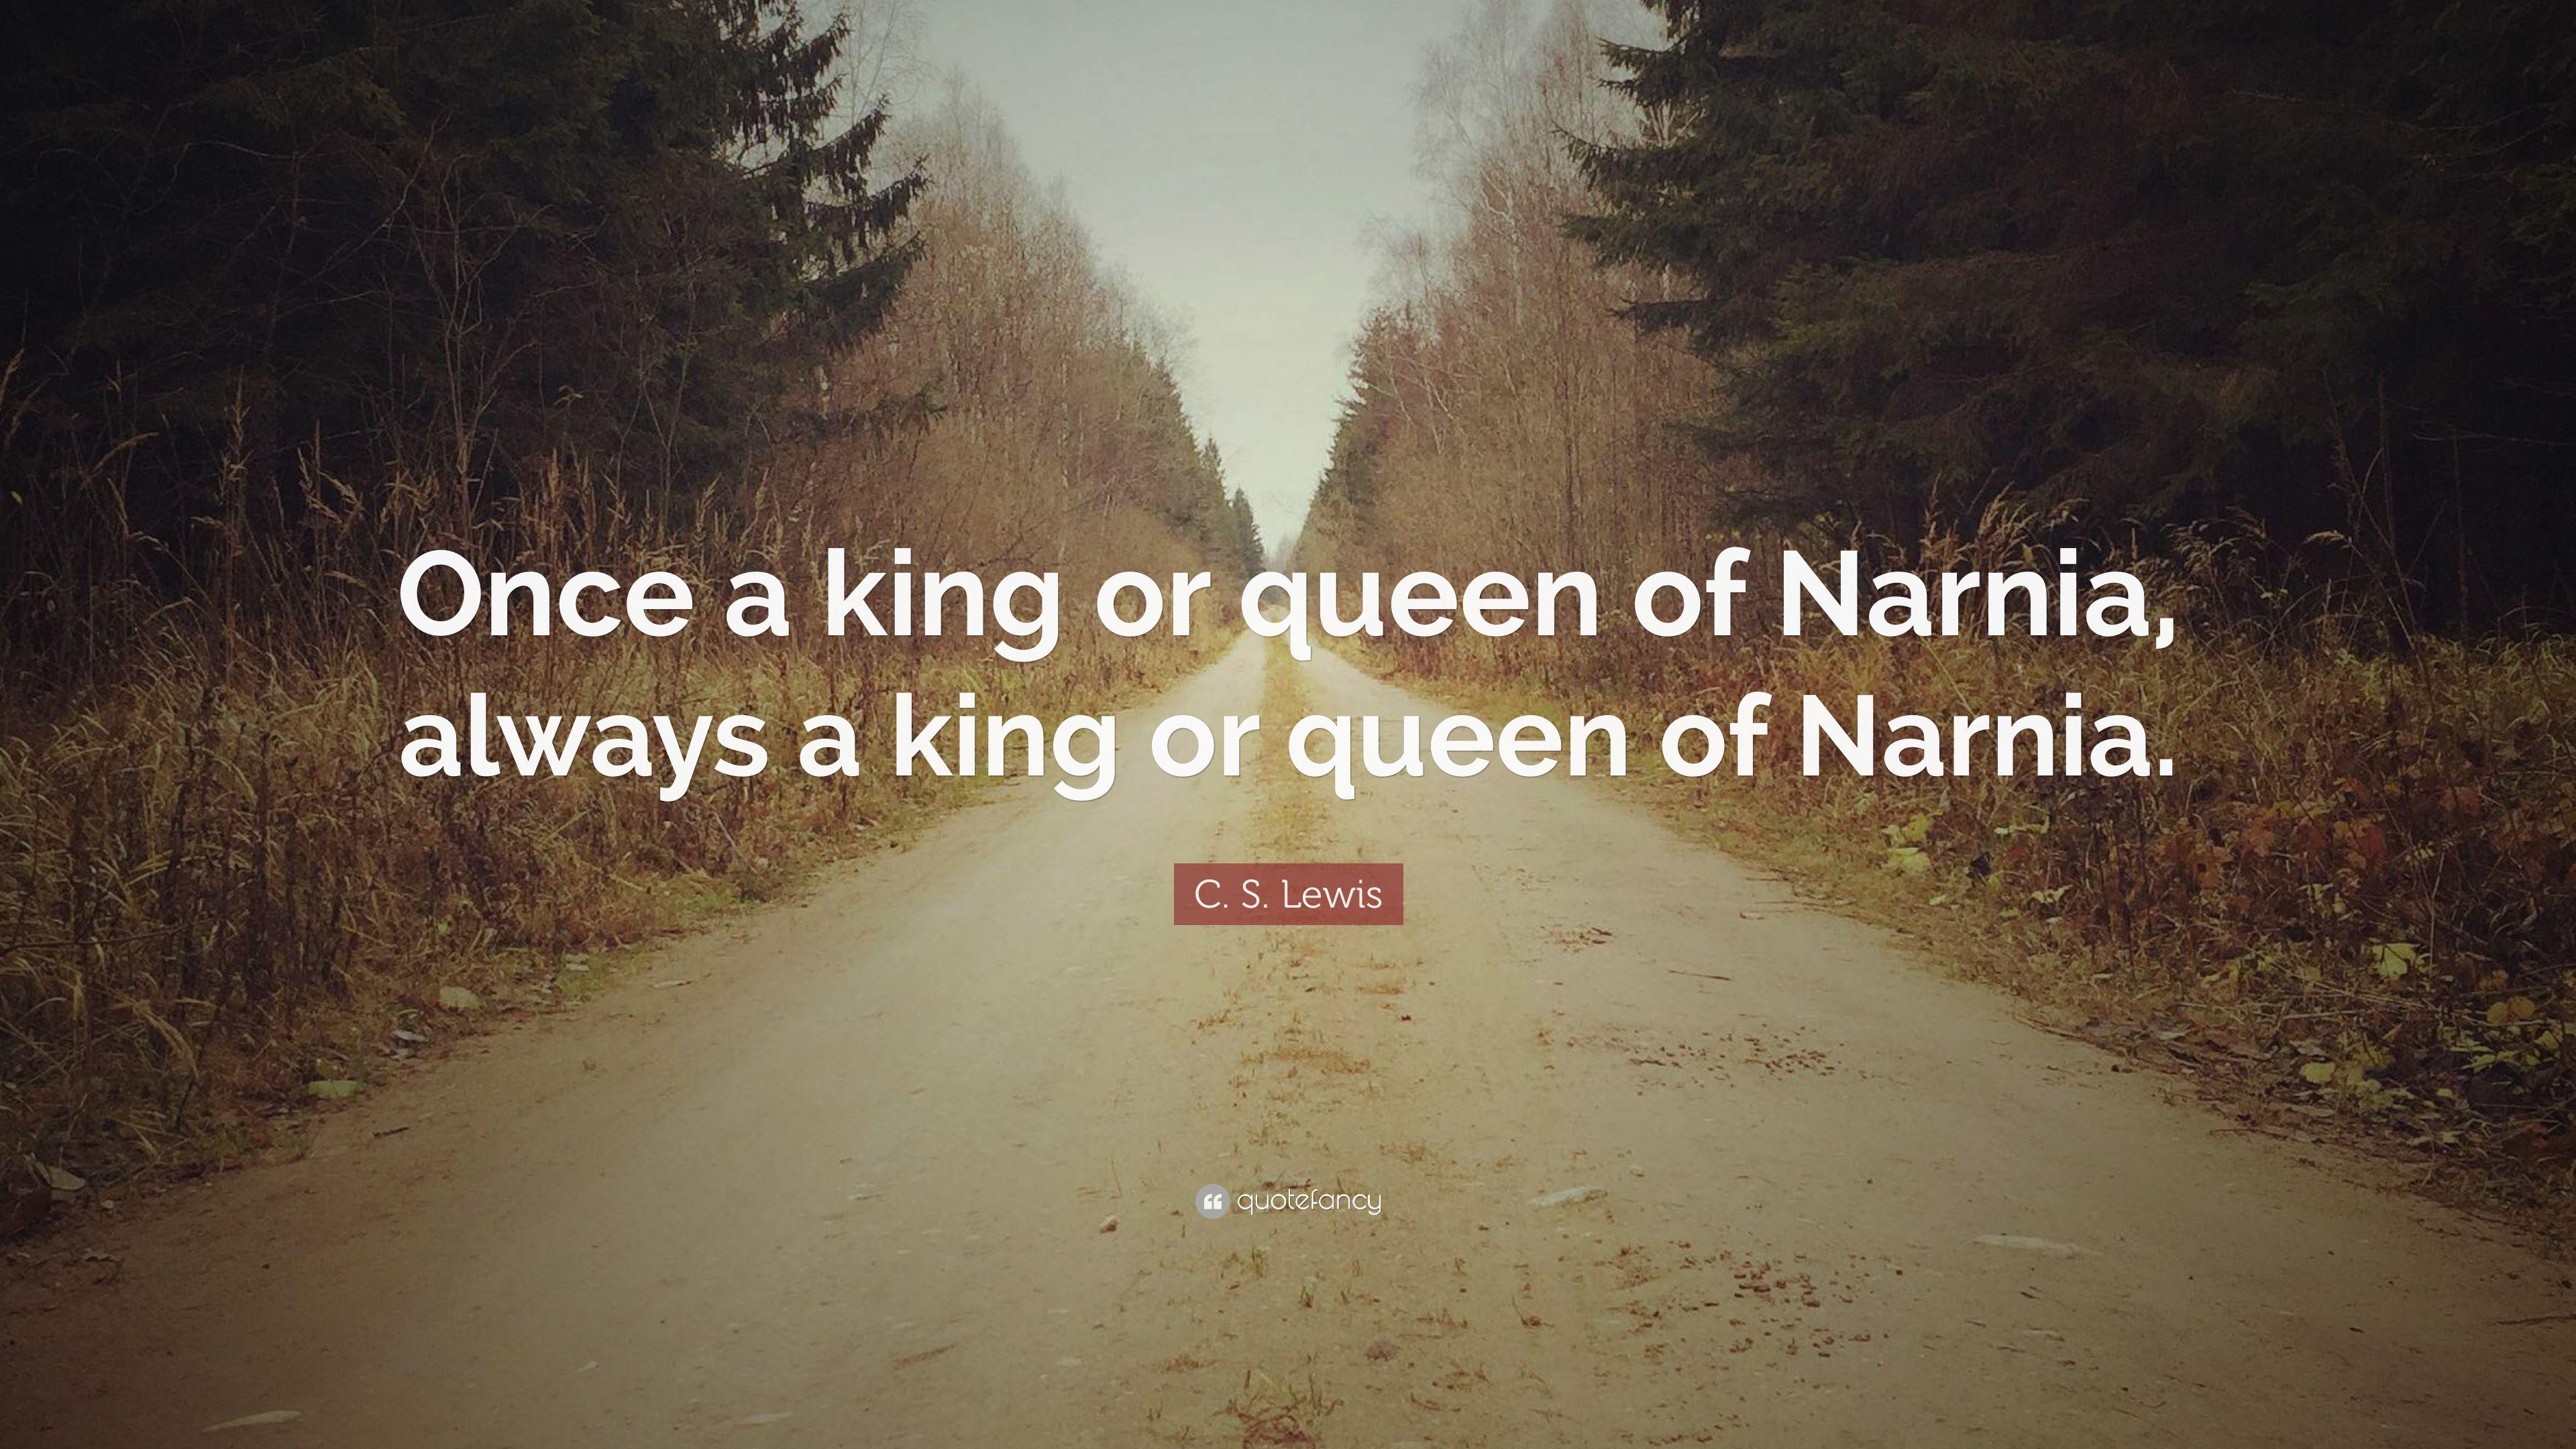 C. S. Lewis Quote: “Once a king or queen of Narnia, always a king